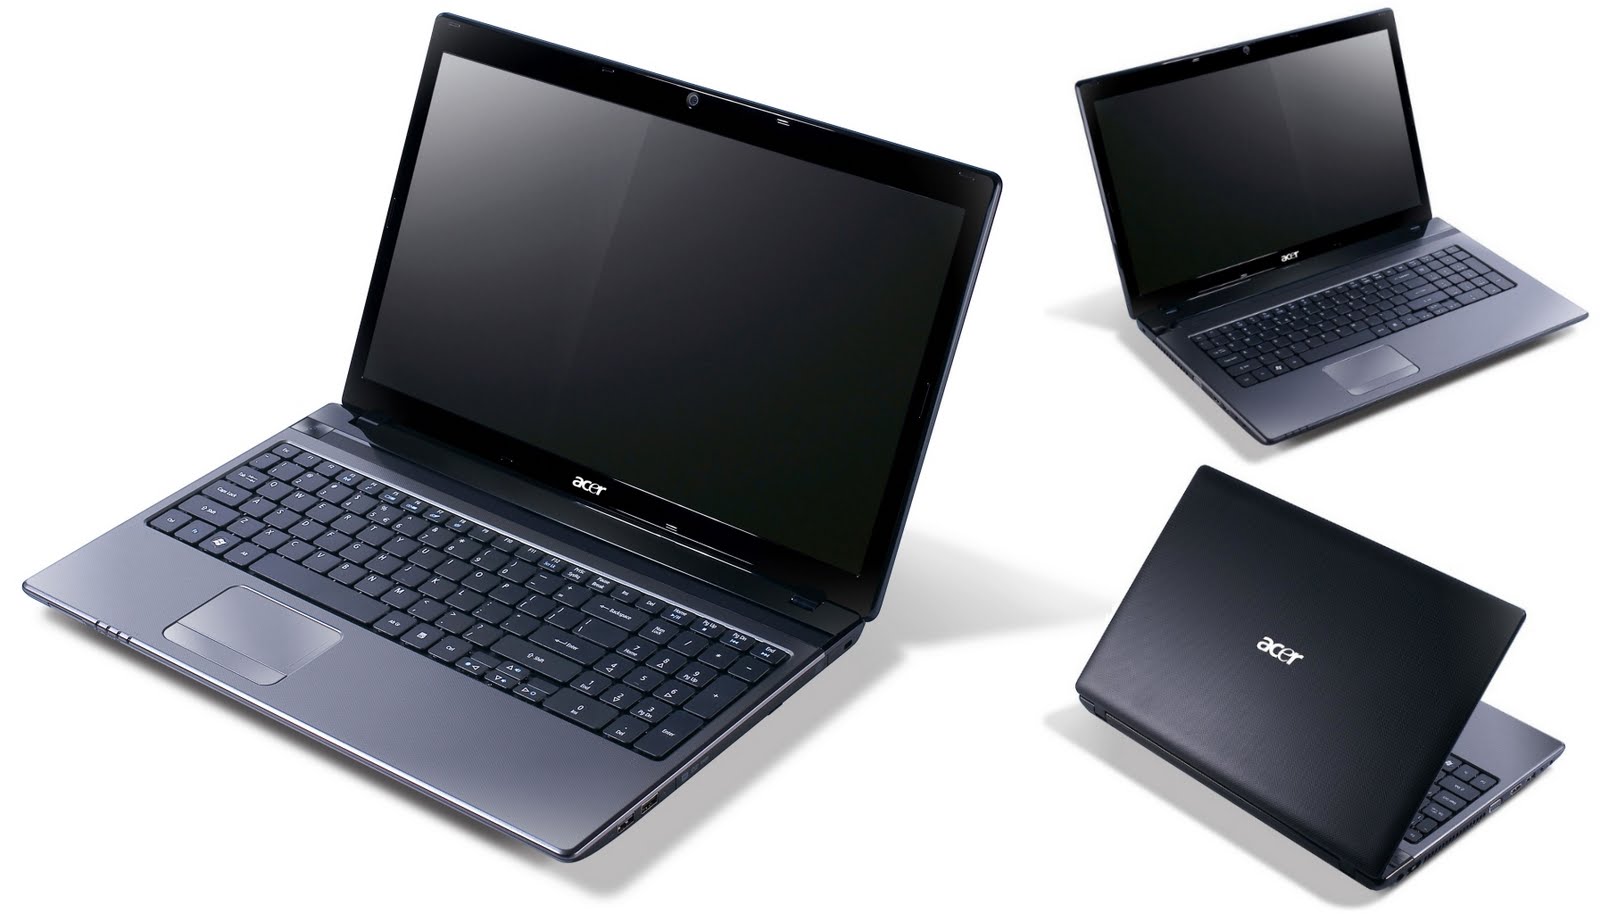 Acer Aspire 5750g Drivers